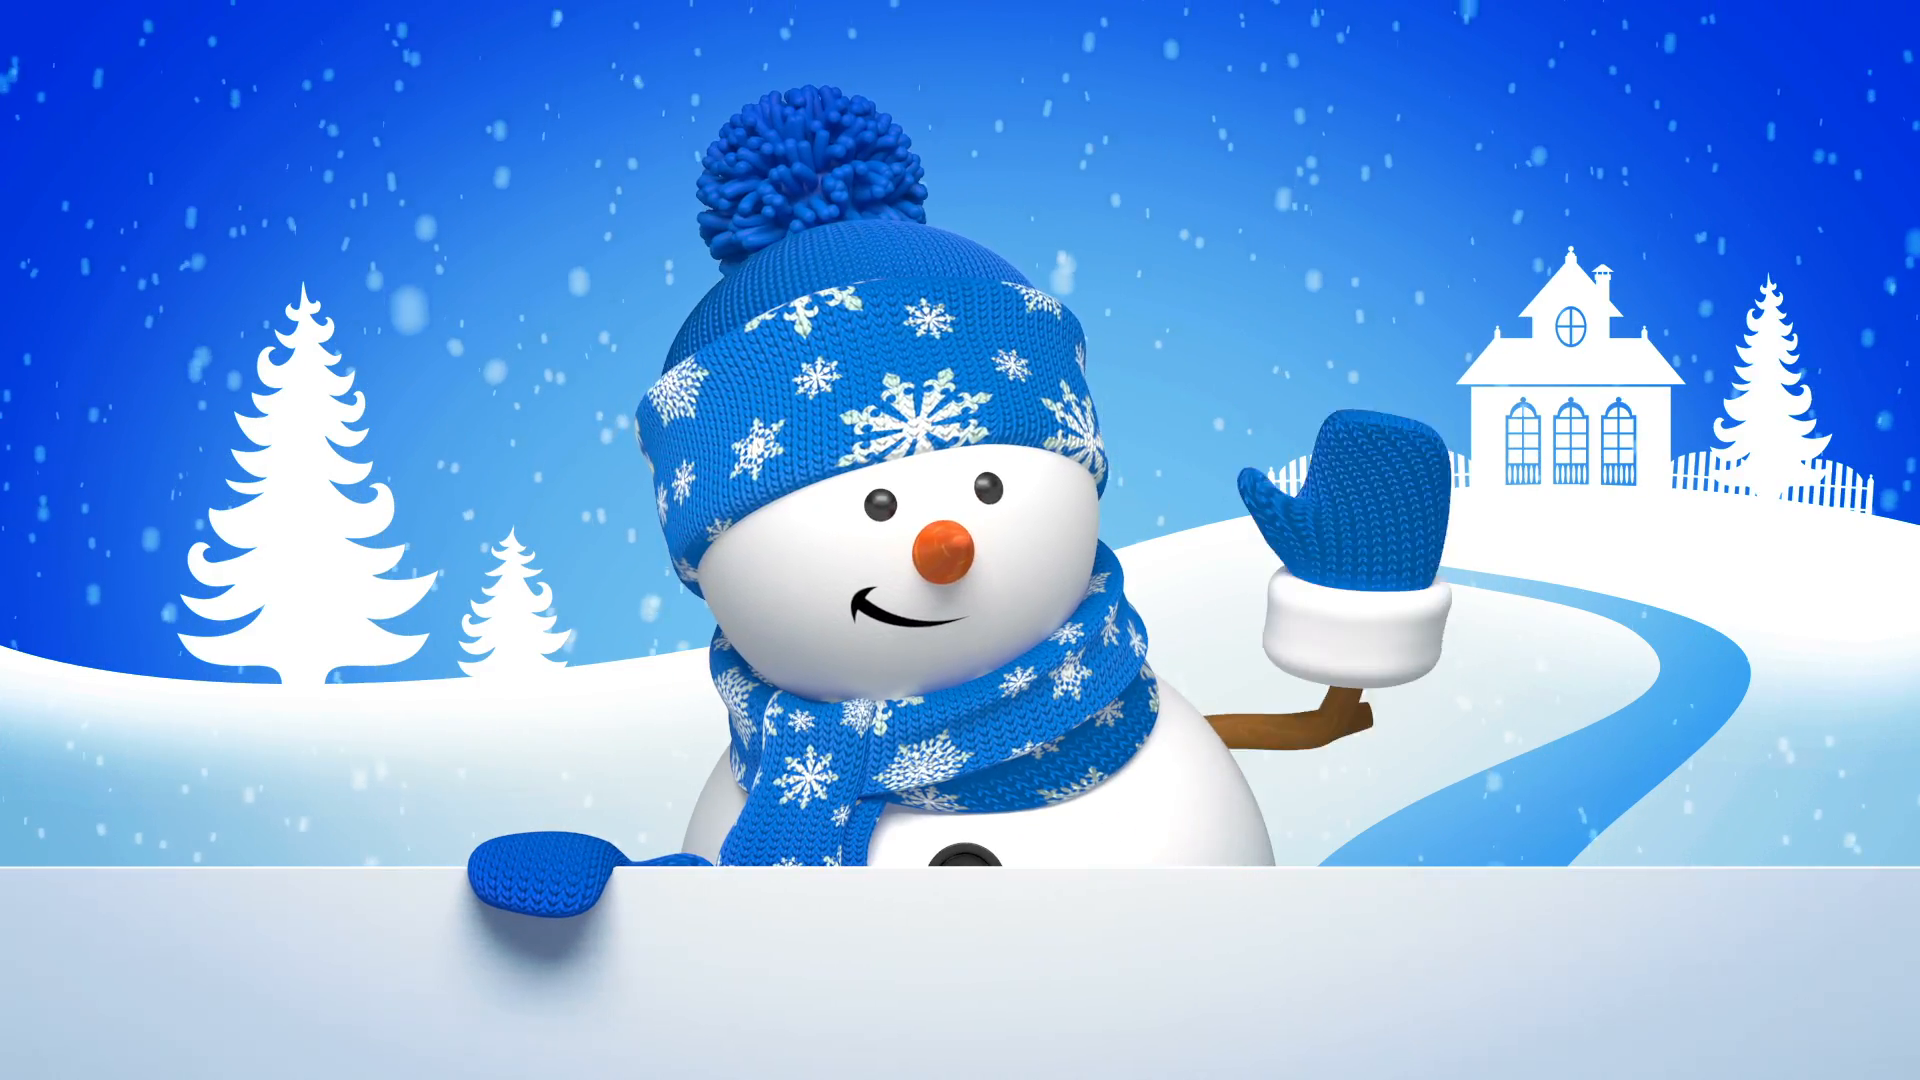 Real Christmas Snowman Picture Wallpaper HD Resolution Click Wallpaper. Merry christmas animation, Merry christmas picture, Christmas snowman